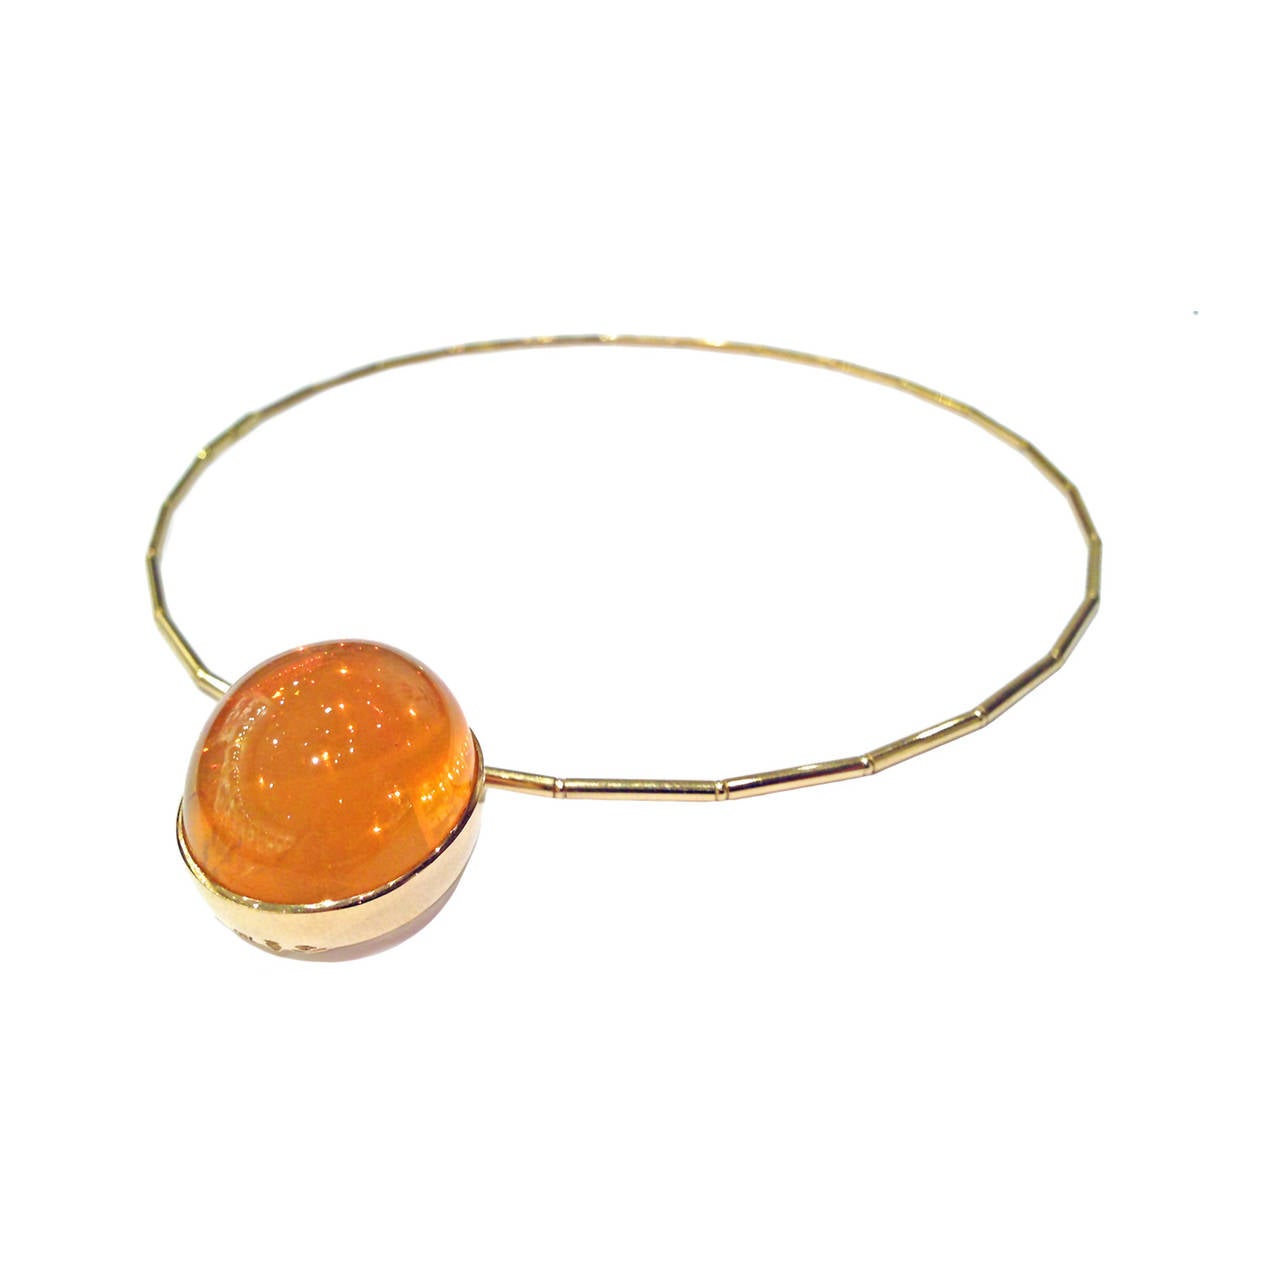 One-of-a-Kind Bowl Pendant handcrafted in 18k gold with a 50.03 carat oval cabochon-cut fire opal. Fire opal has truly phenomenal optical qualities, as it glows in any light setting. Natural and cut in Germany, the fire opal displays a long hairline